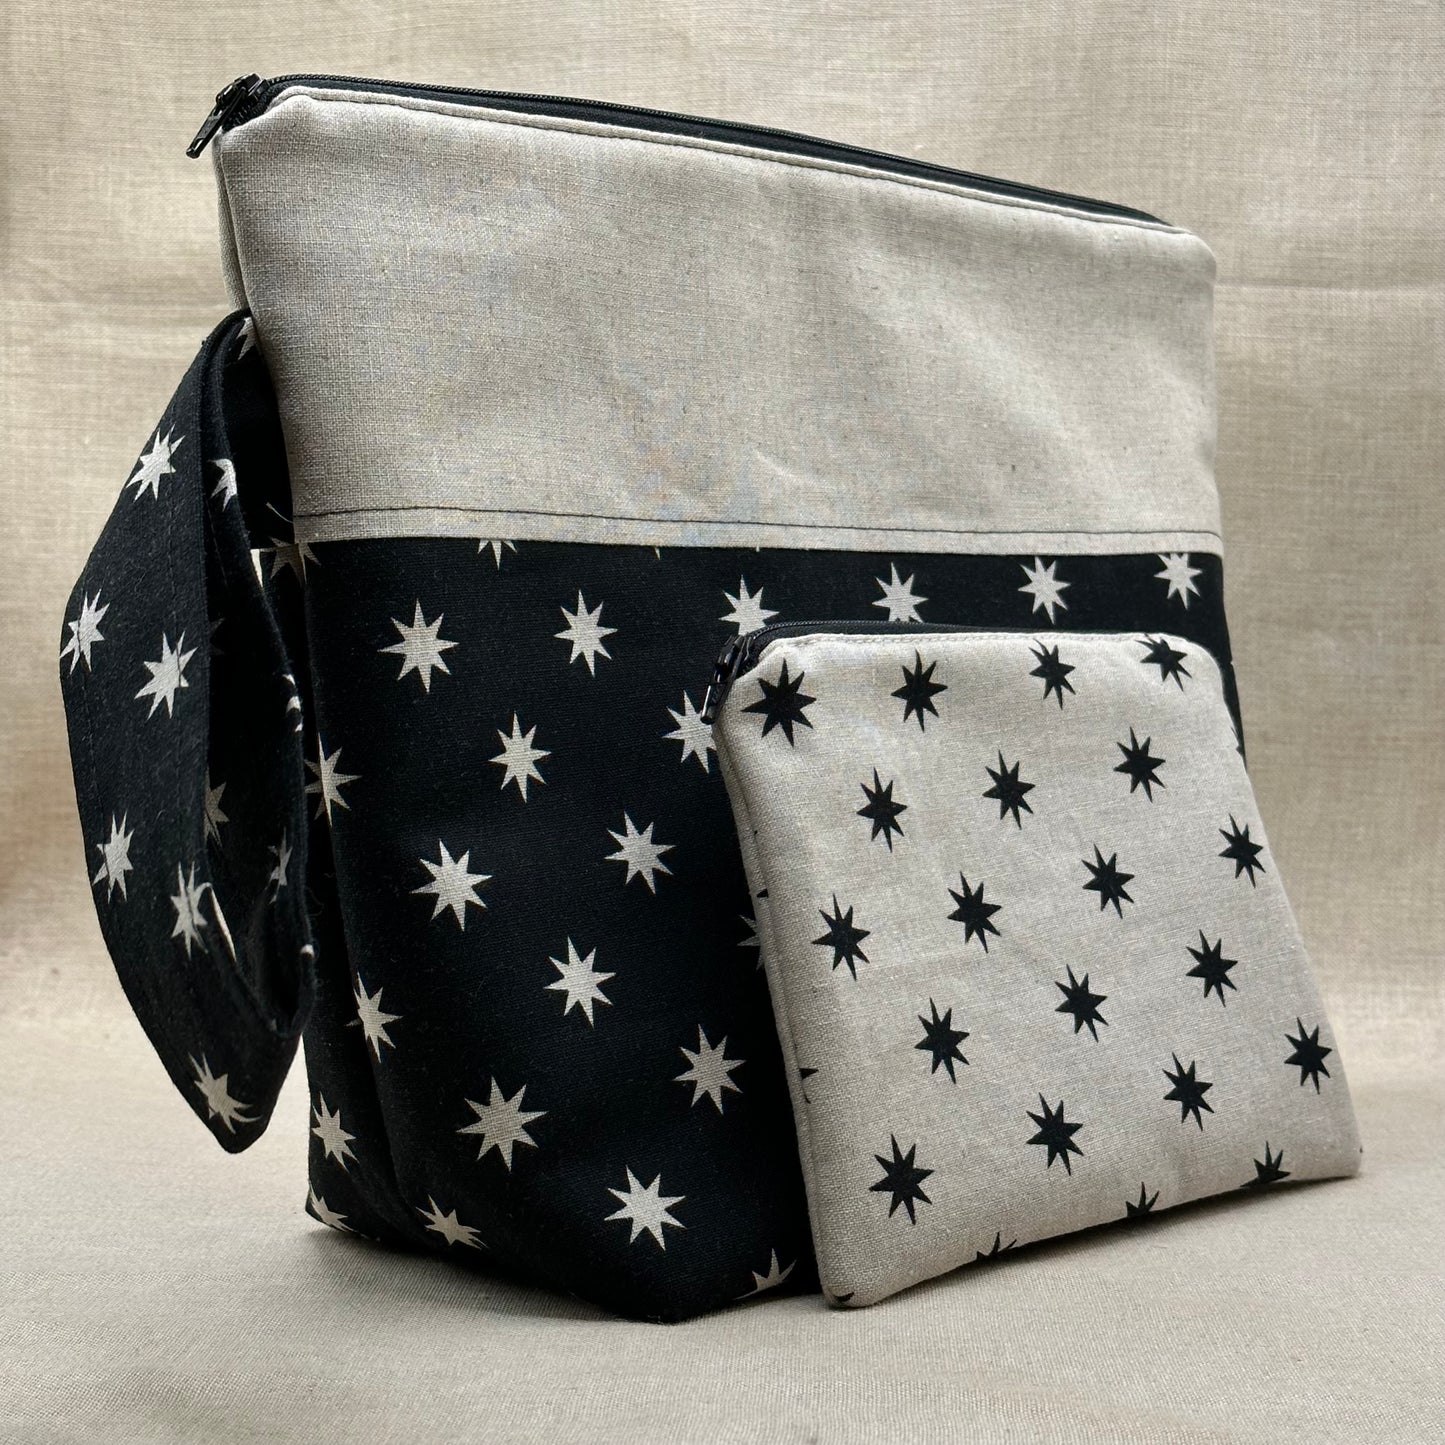 Shaded Stitchery, Roxy Floss Co, and Evertote: My Necessity Full Kit - Stars Project Bag and Roxy Floss Co Floss Pack